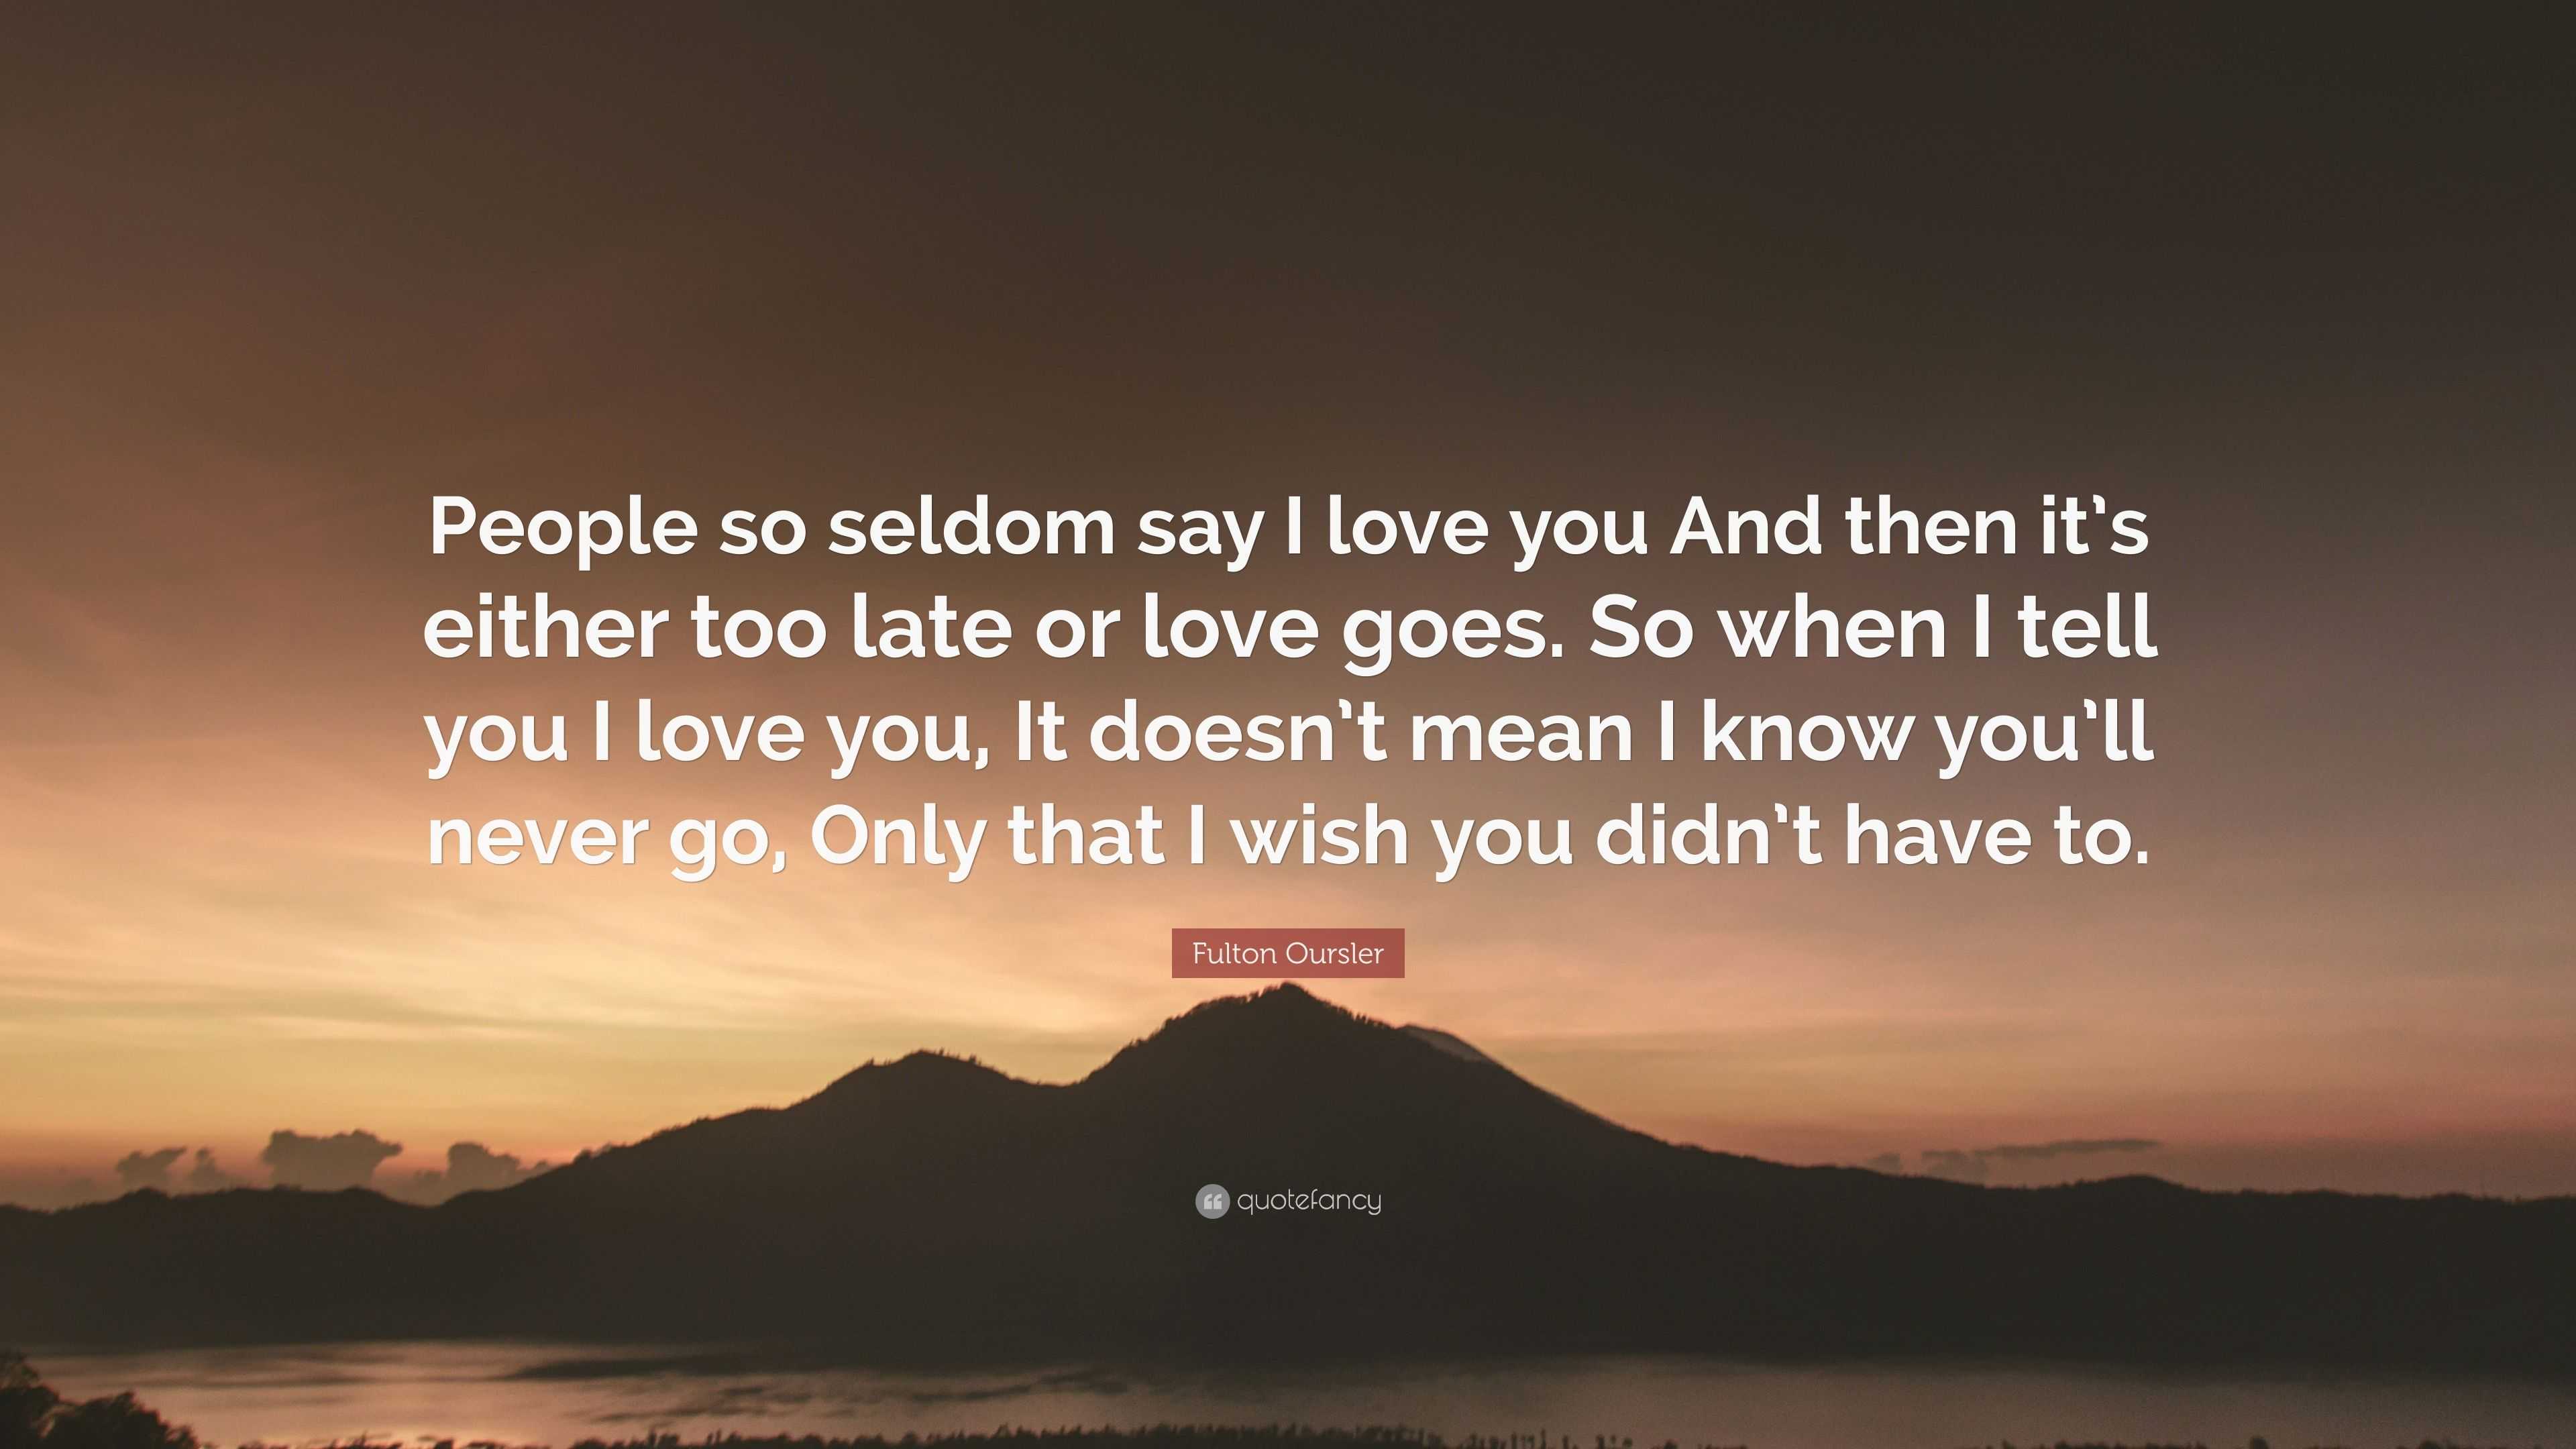 Fulton Oursler Quote “People so seldom say I love you And then it s either